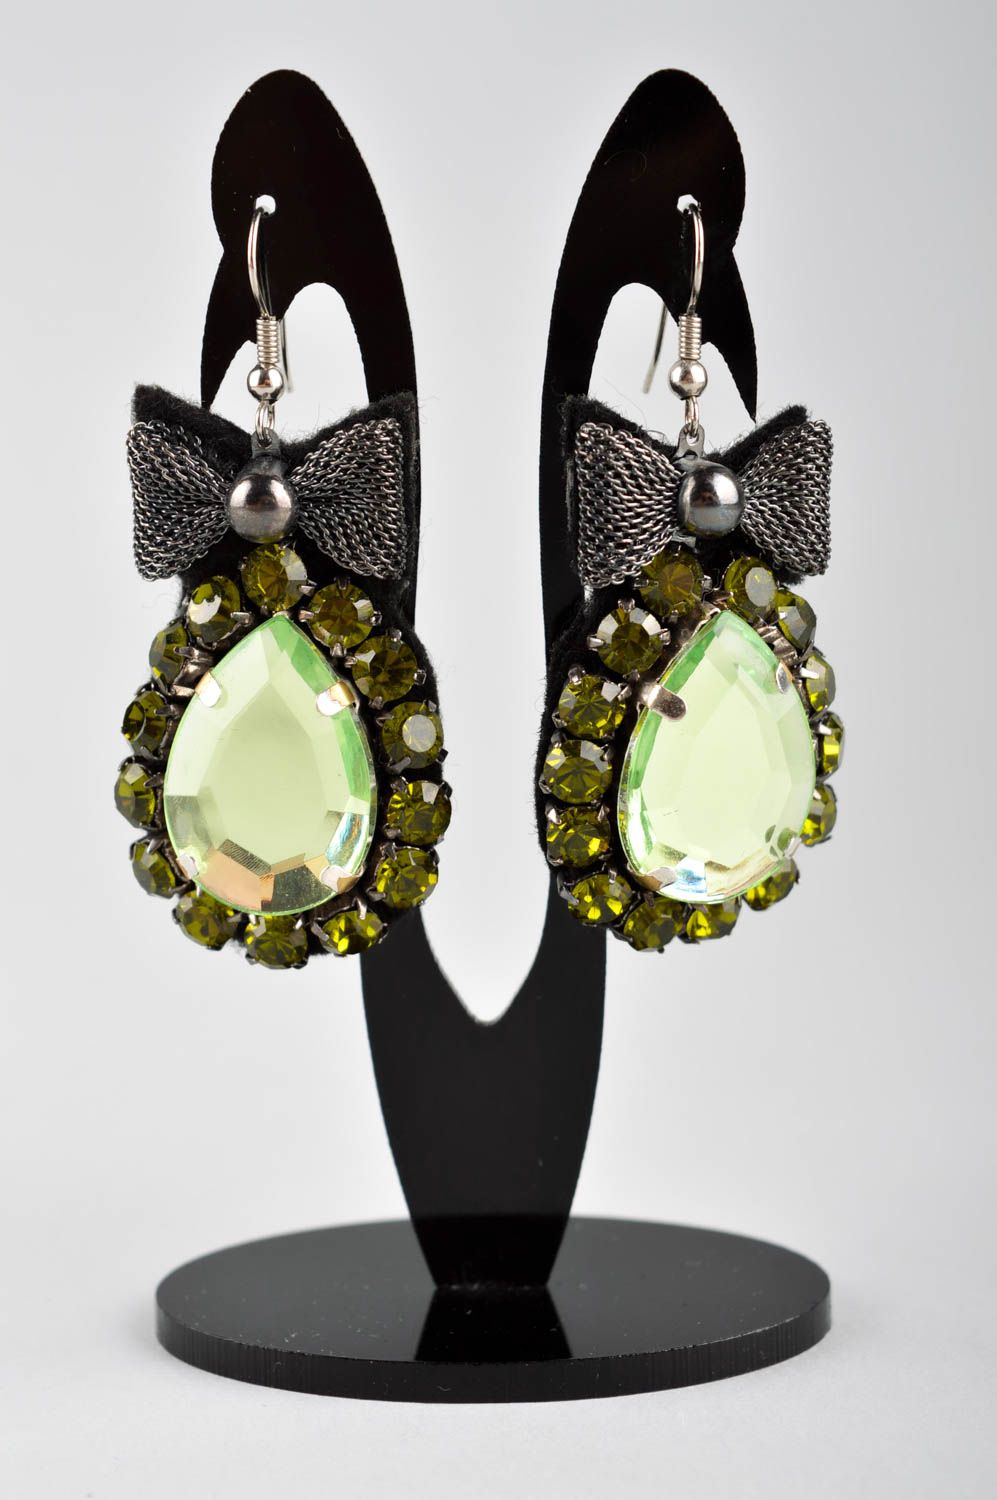 Evening earrings with crystals handmade accessories stylish jewelry for women photo 2